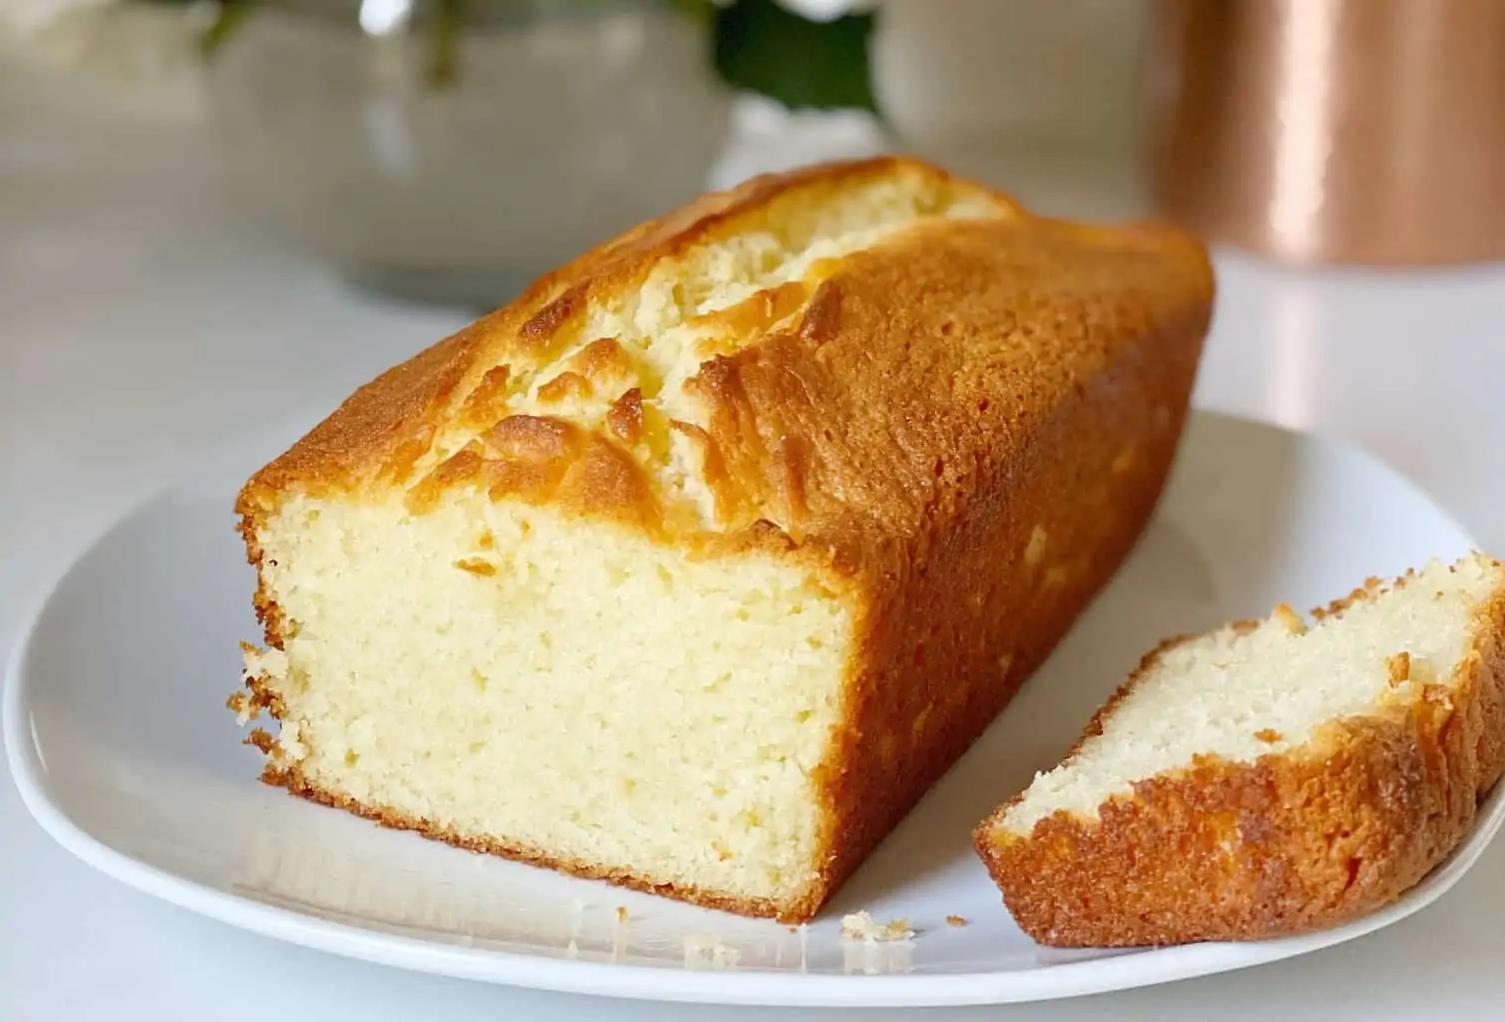  Creamy and delectable, this yogurt pound cake is a must-try!